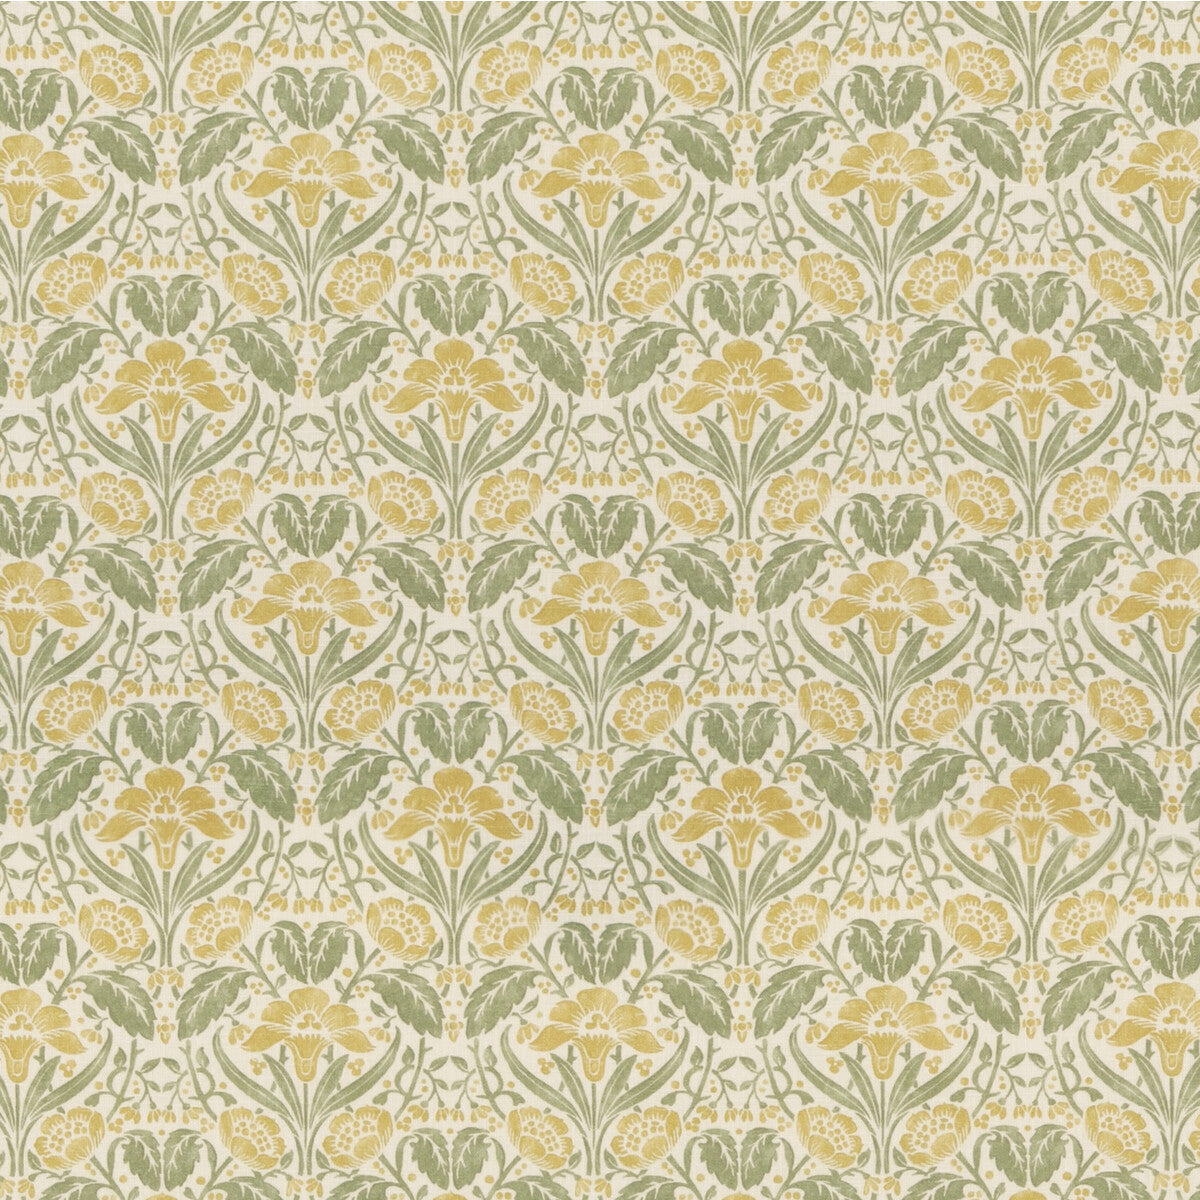 Iris Meadow fabric in yellow/green color - pattern BP10979.2.0 - by G P &amp; J Baker in the Original Brantwood Fabric collection